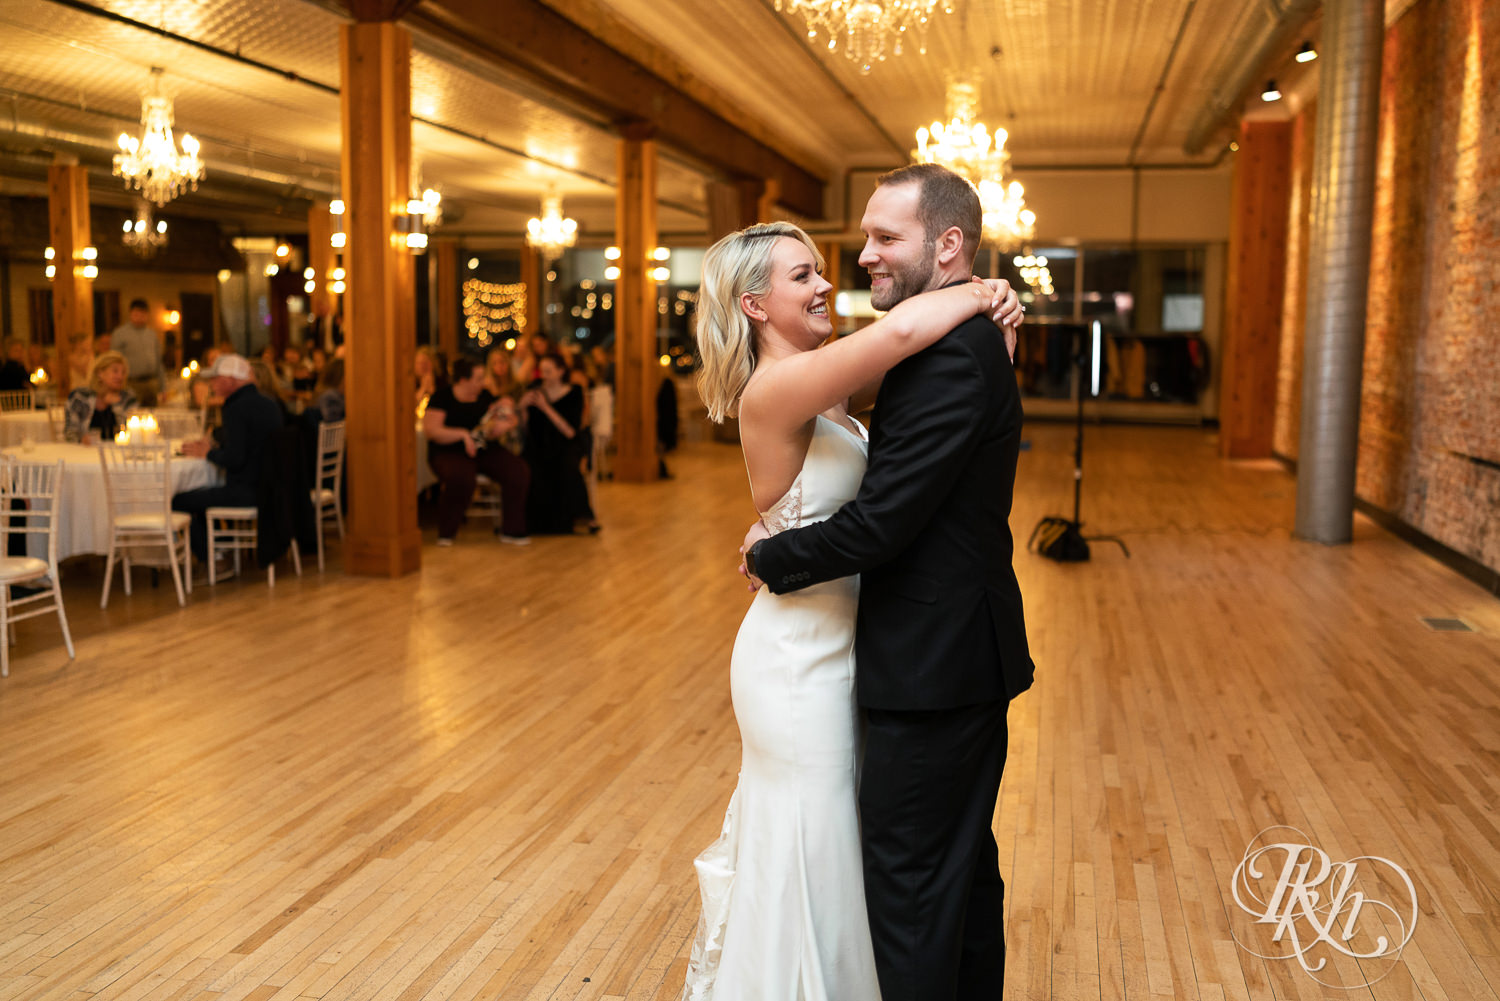 Bride and groom share first dance in 3 Ten Event Venue in Faribault, Minnesota.